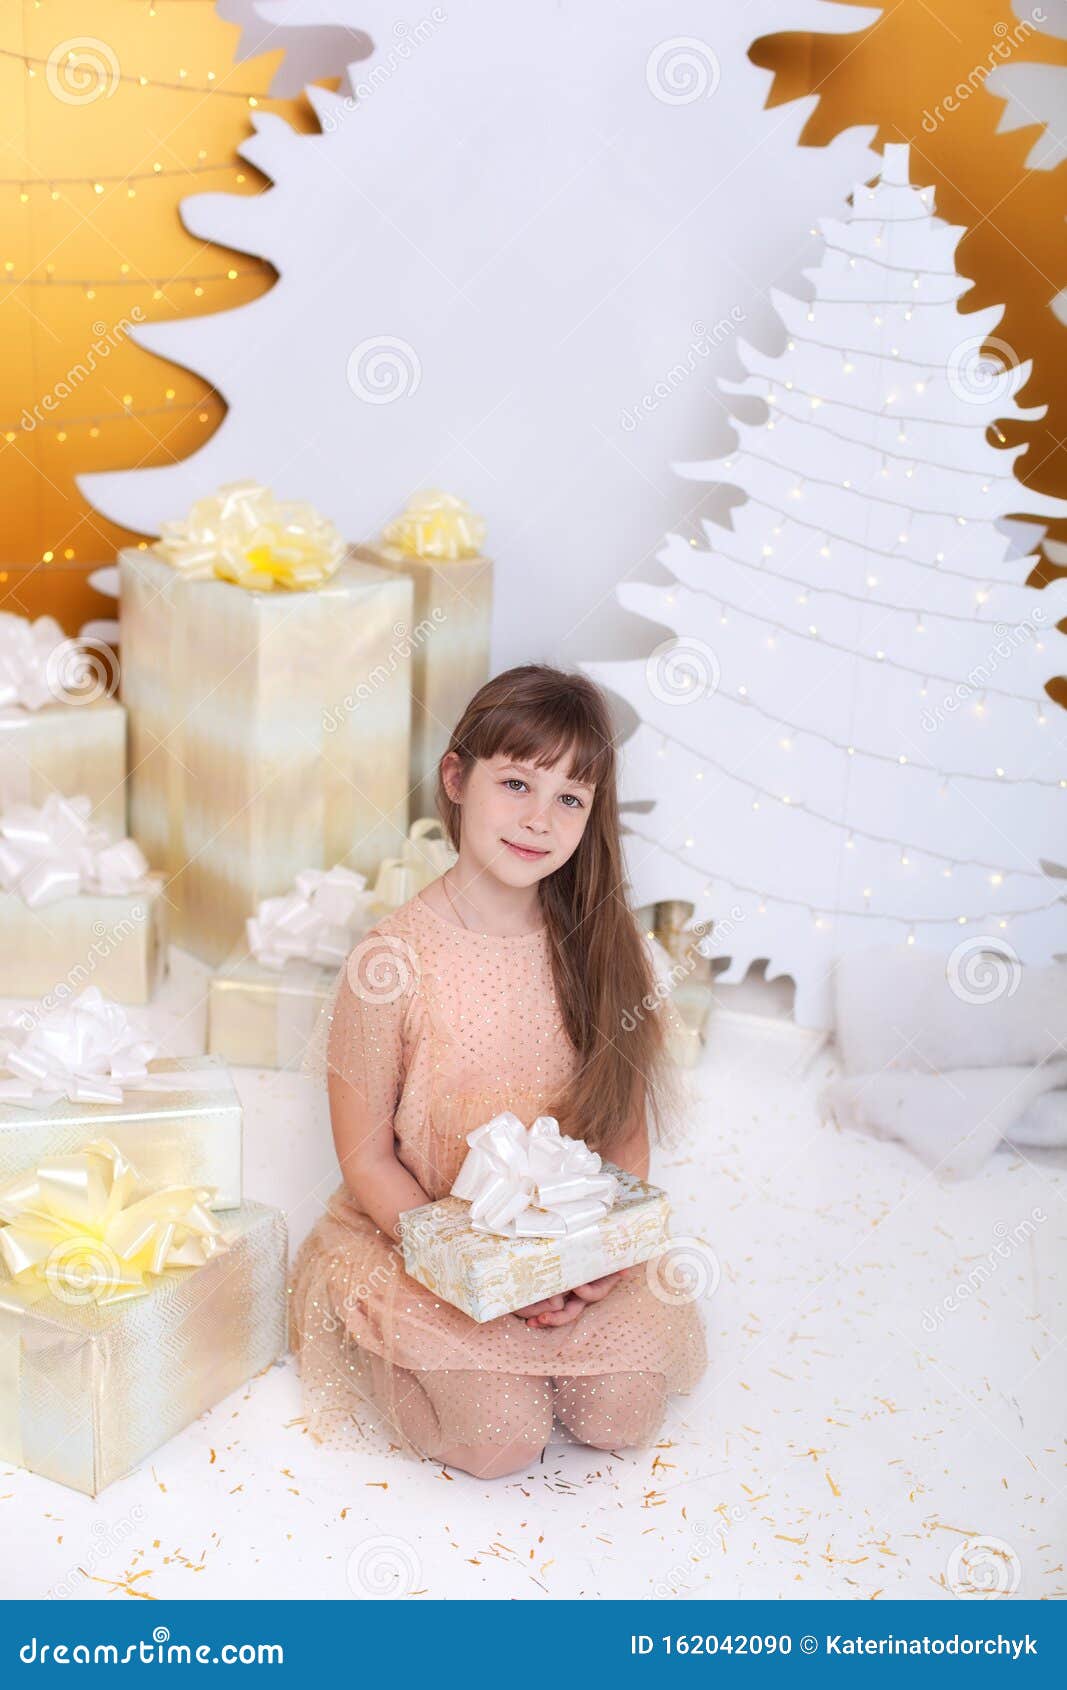 Merry Christmas And Happy Holidays. New Year 2020. Christmas Holiday Concept. Little Girl In ...